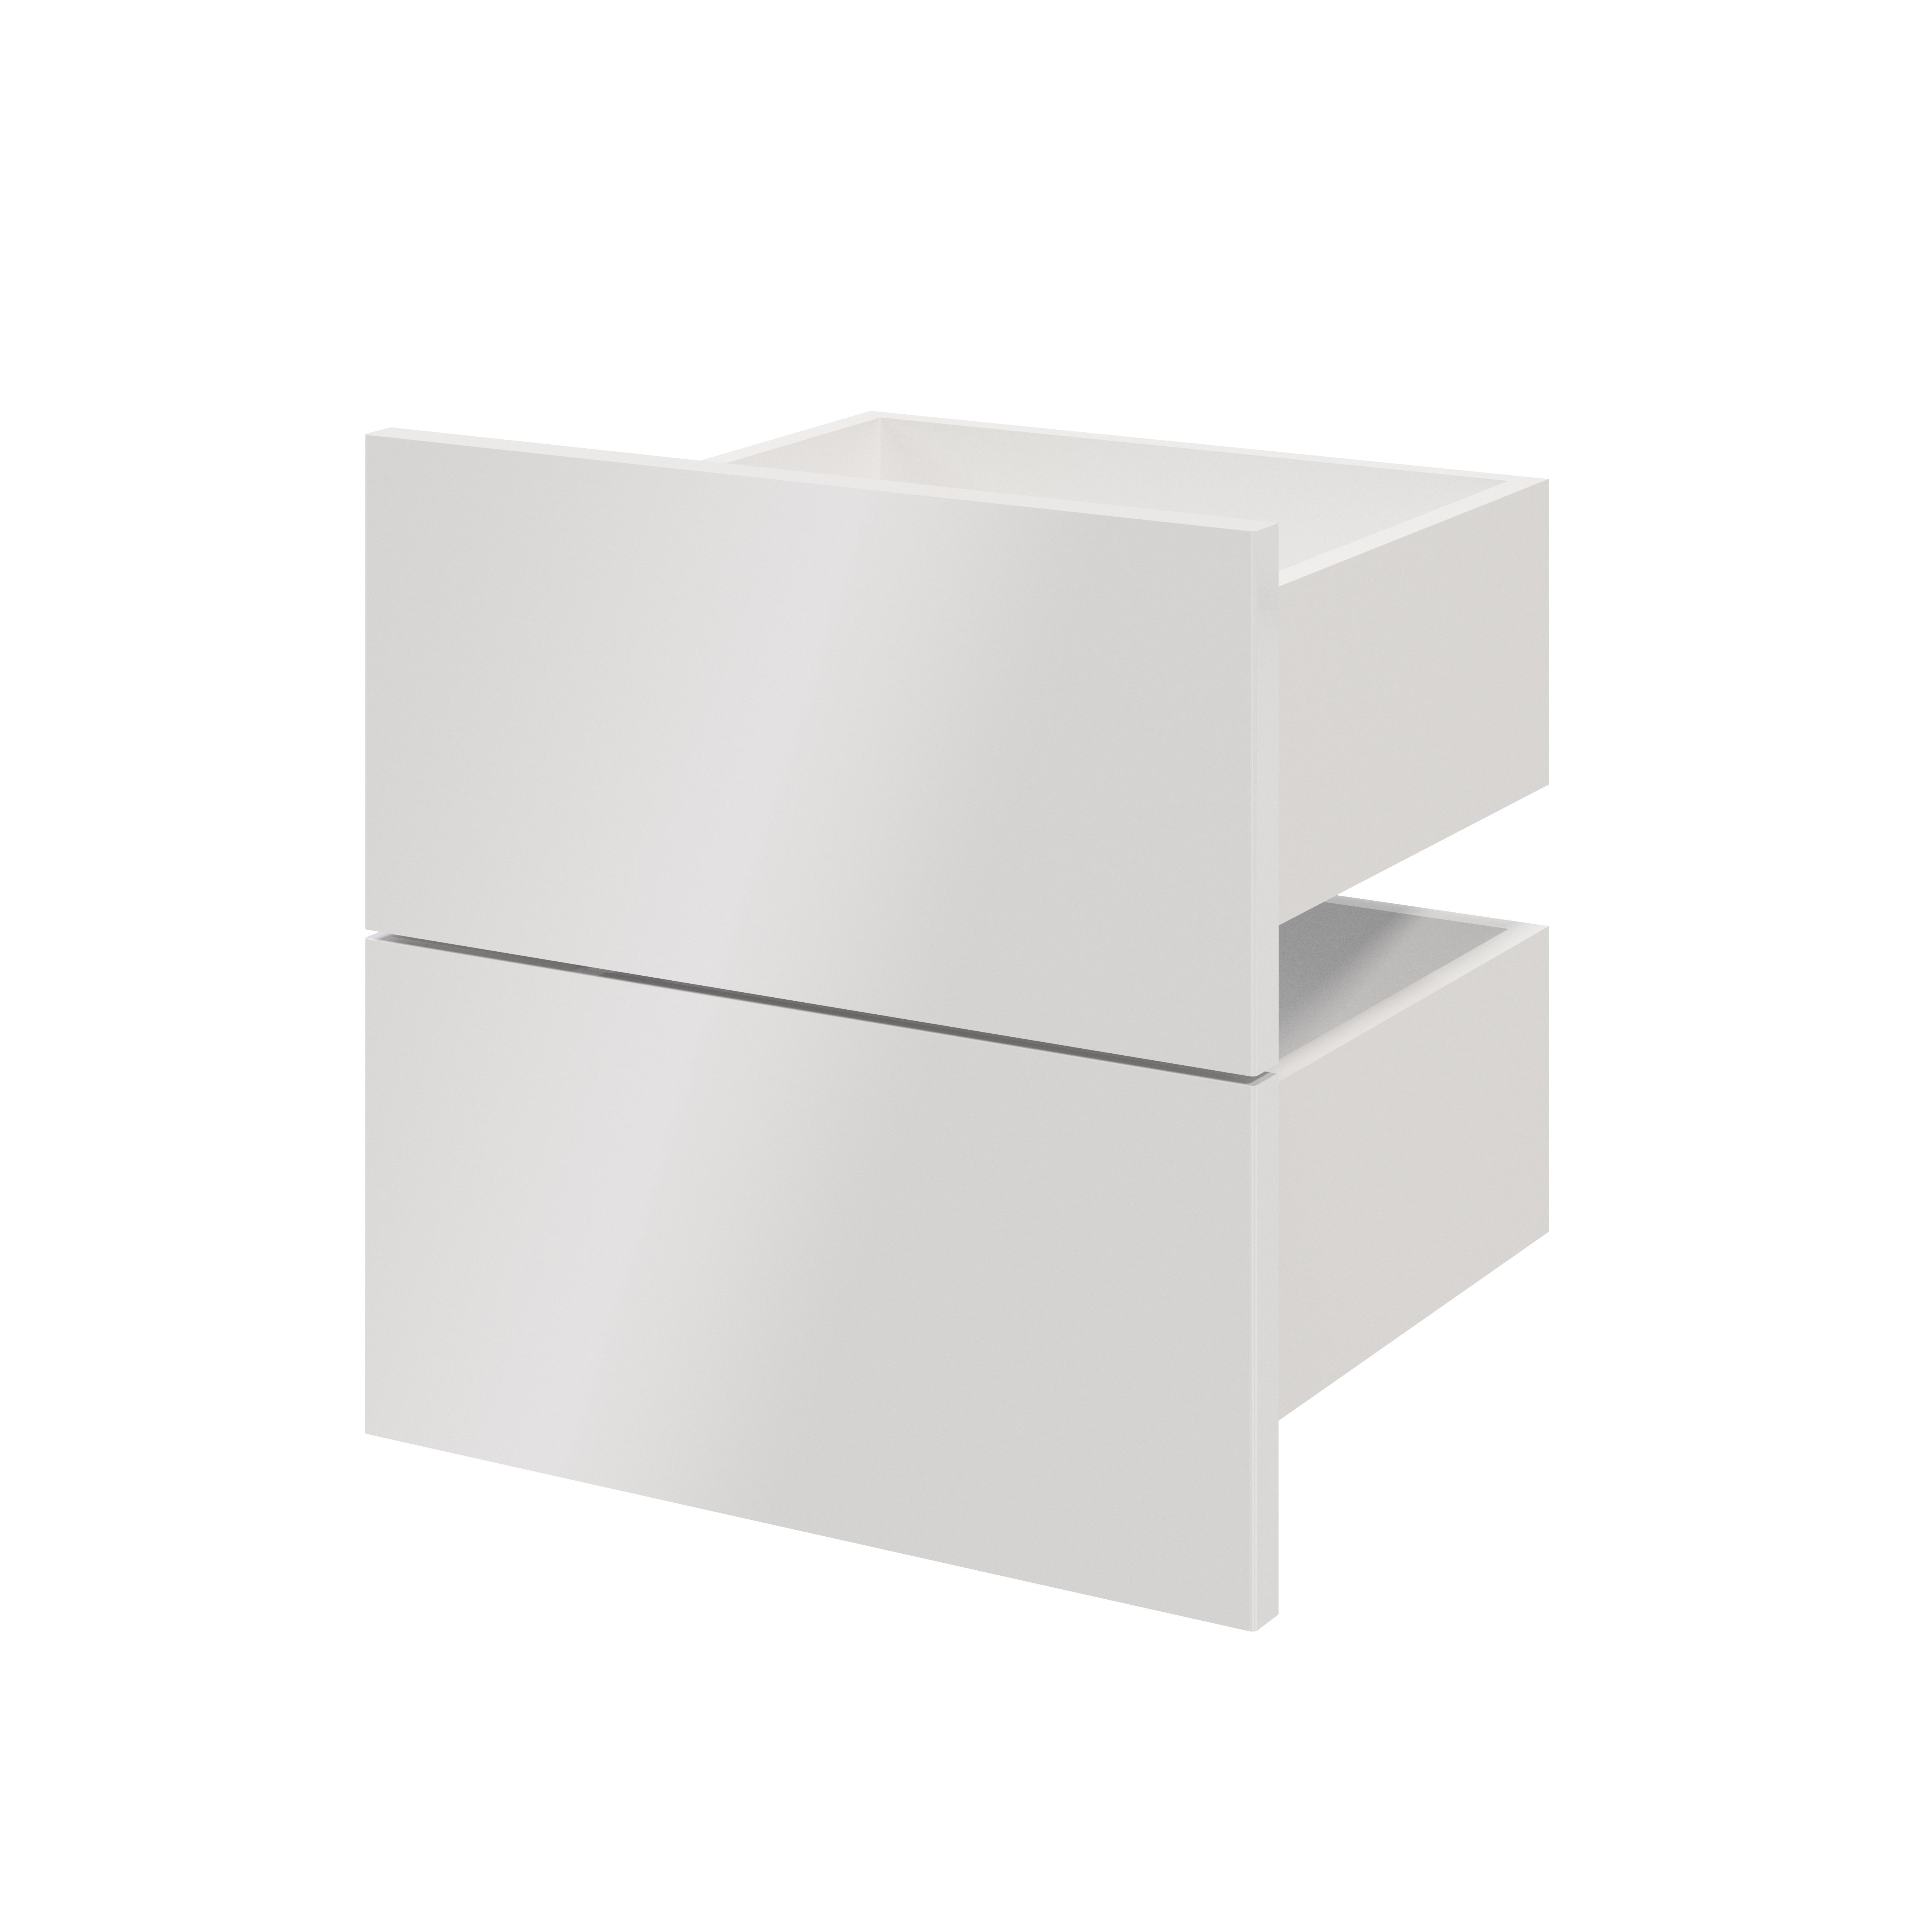 GoodHome Atomia Gloss white Slab External Drawer (H)184.5mm (W)372mm (D)300mm, Set of 2